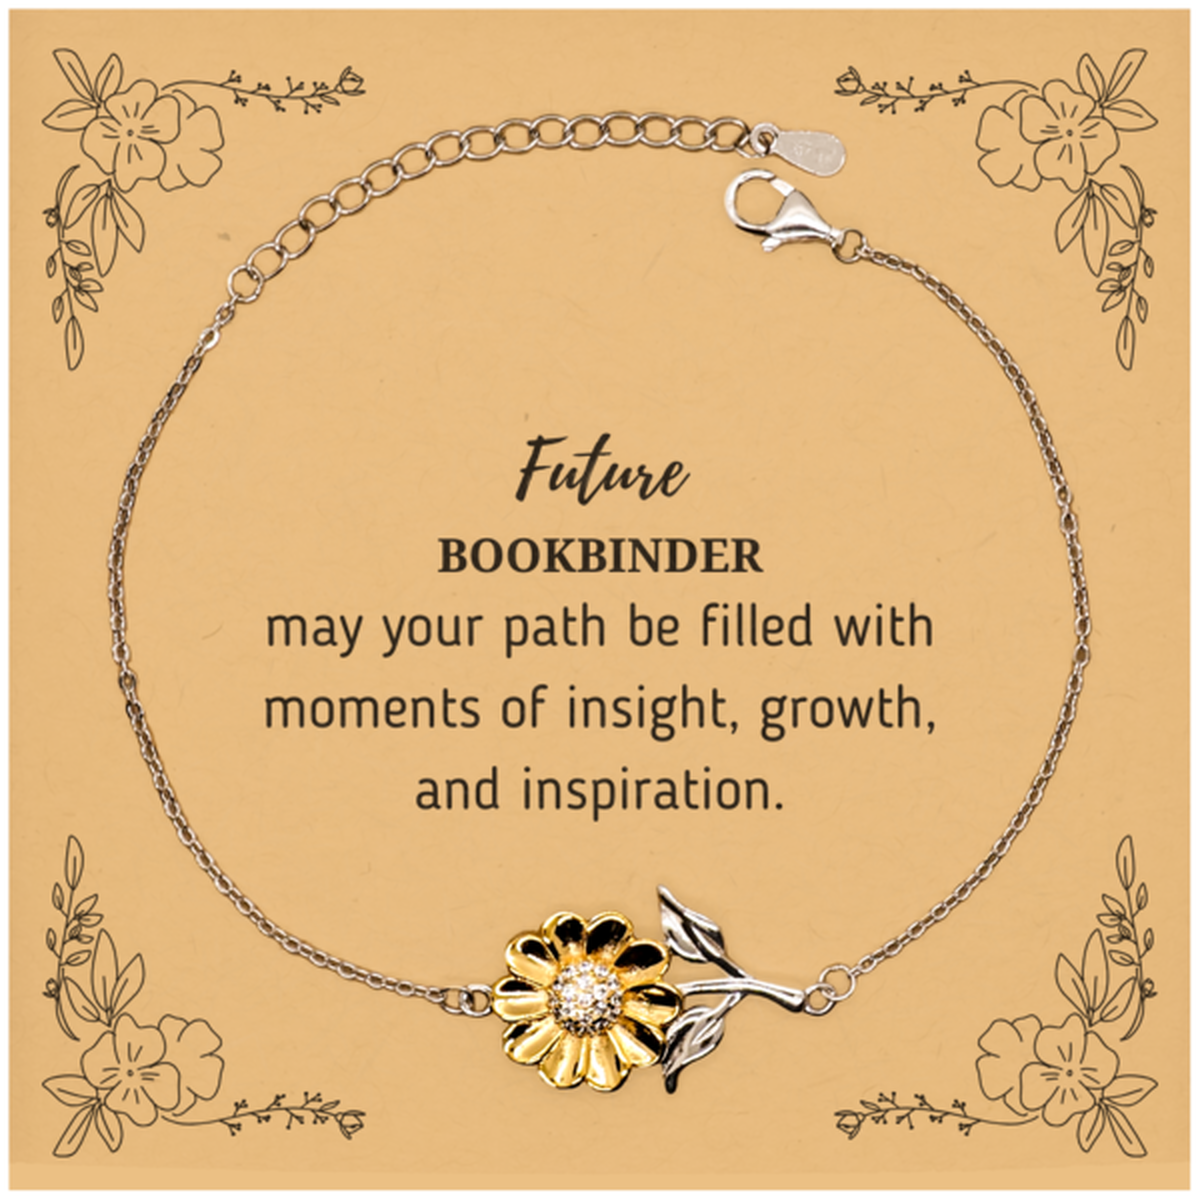 Future Bookbinder Gifts, May your path be filled with moments of insight, Graduation Gifts for New Bookbinder, Christmas Unique Sunflower Bracelet For Men, Women, Friends